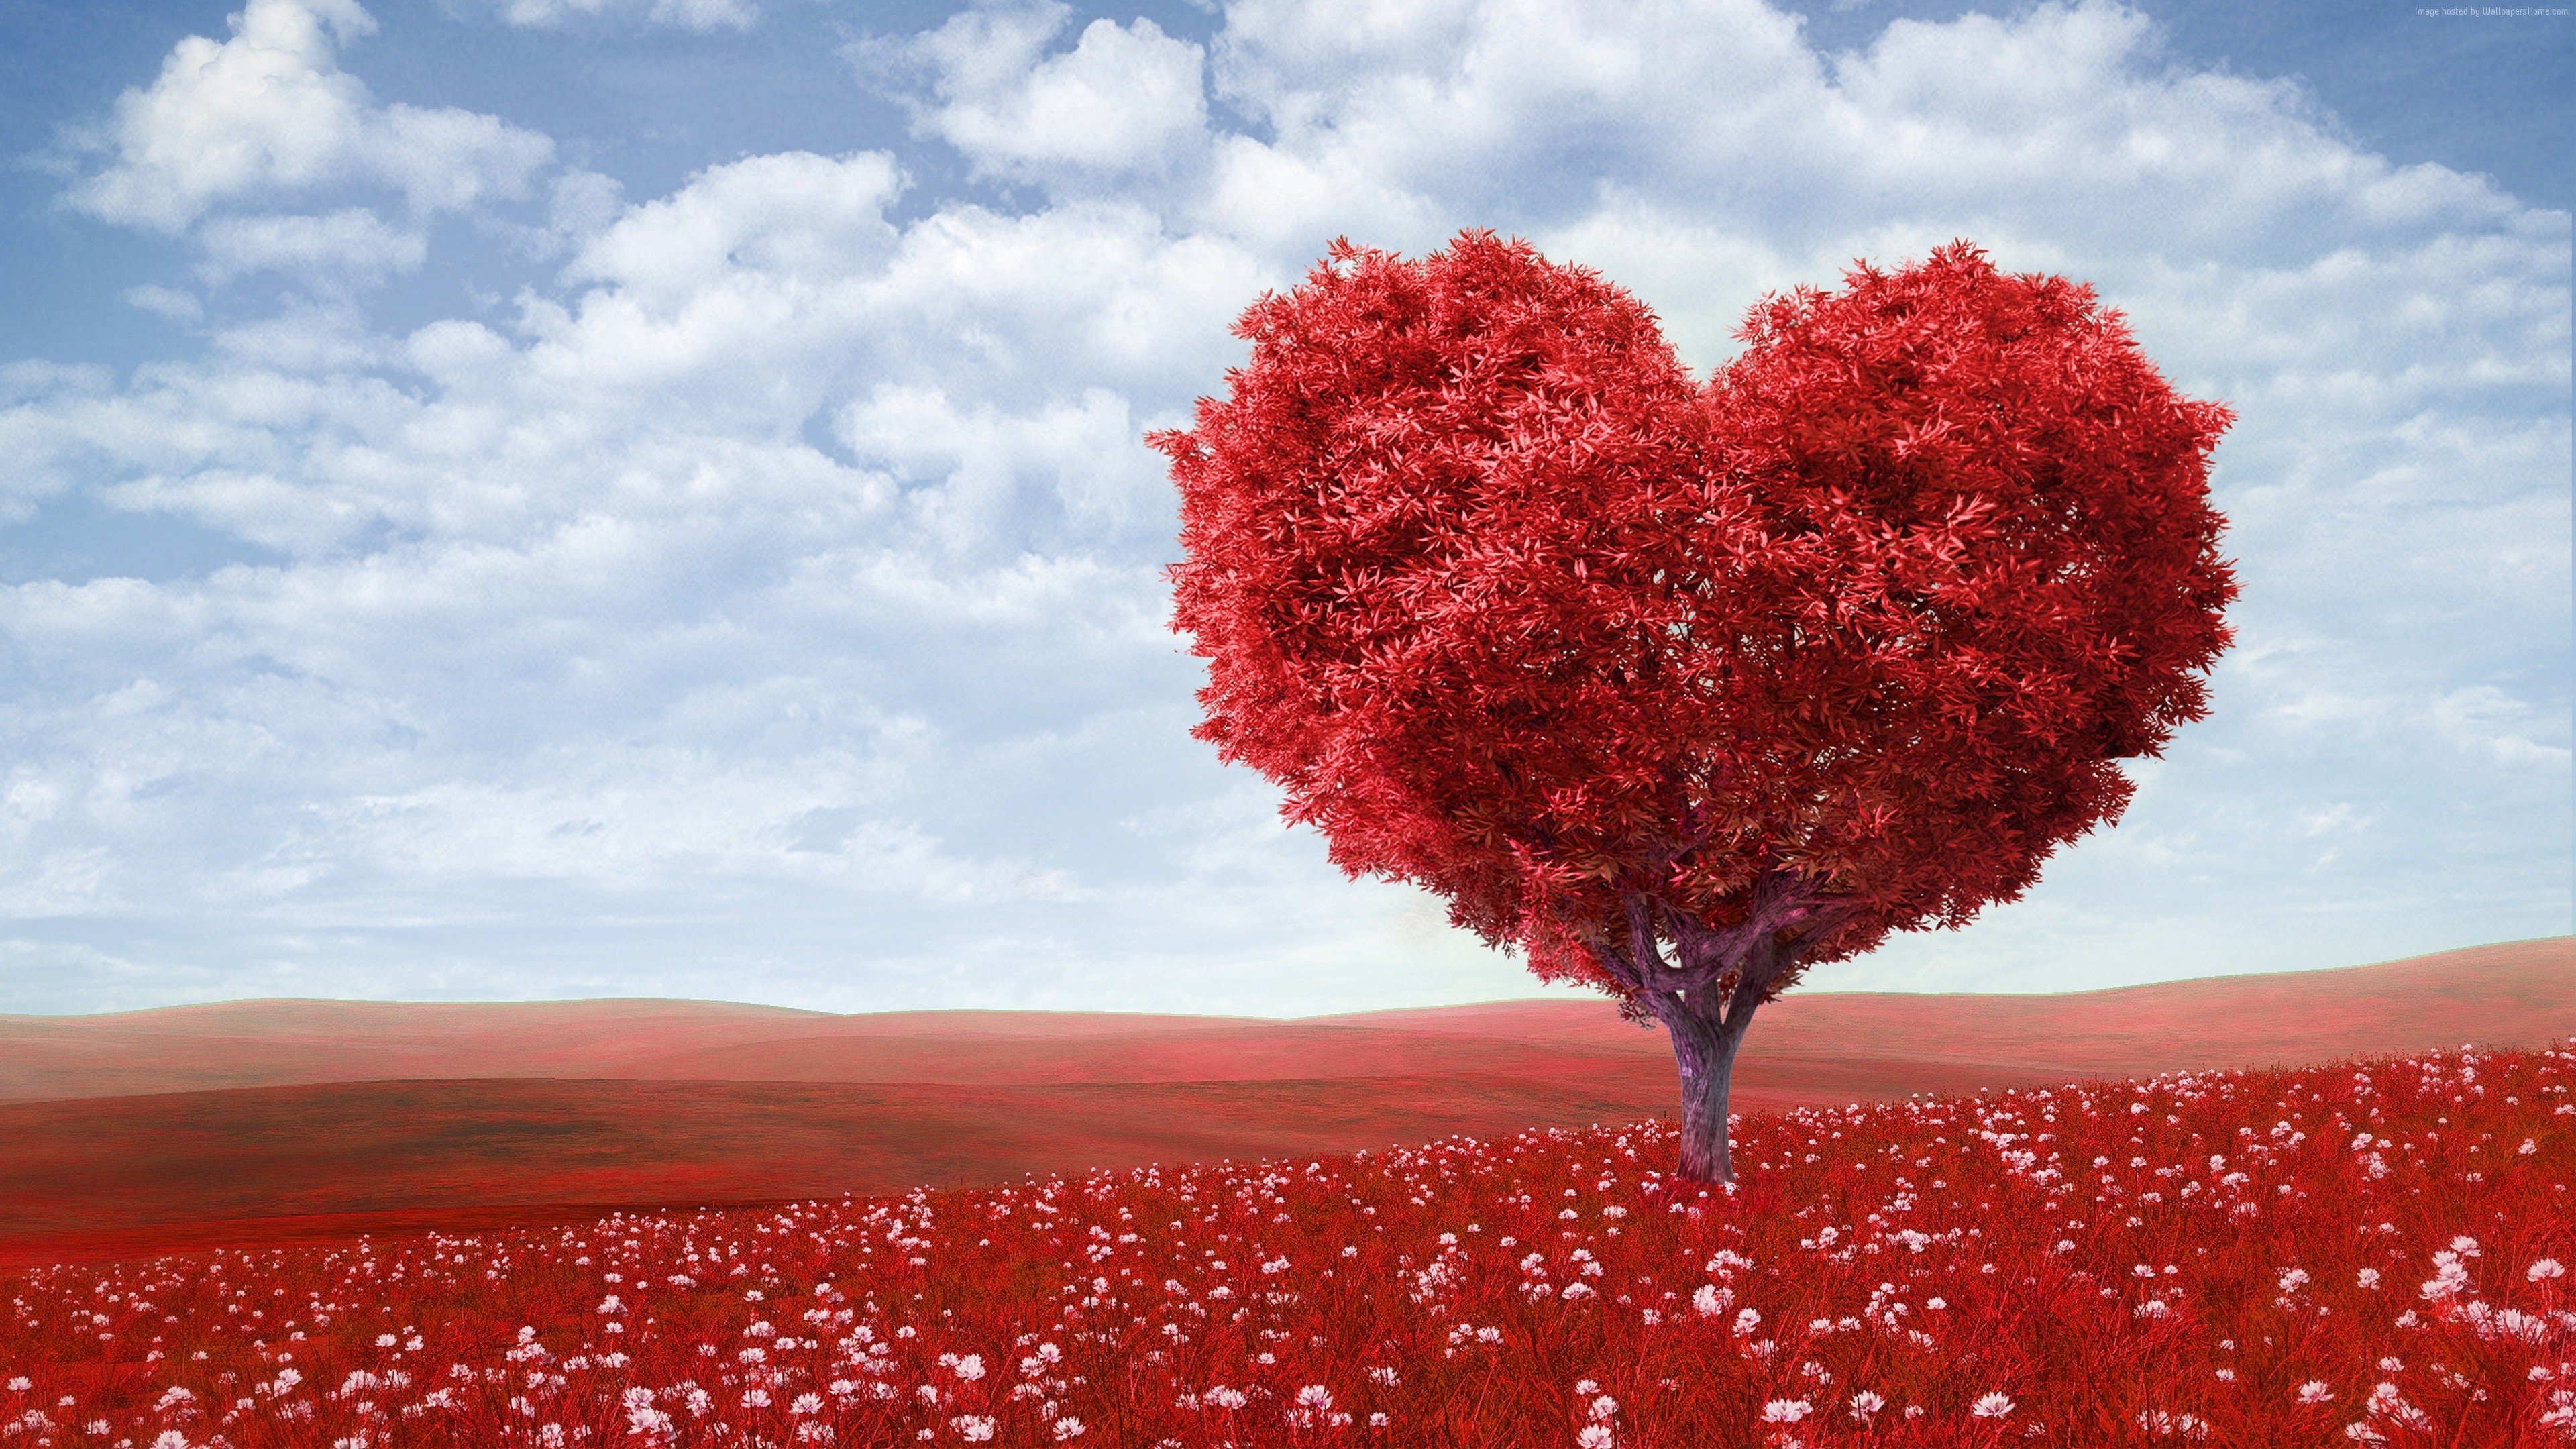 Stock Images love image, heart, 4k, tree, Stock Images